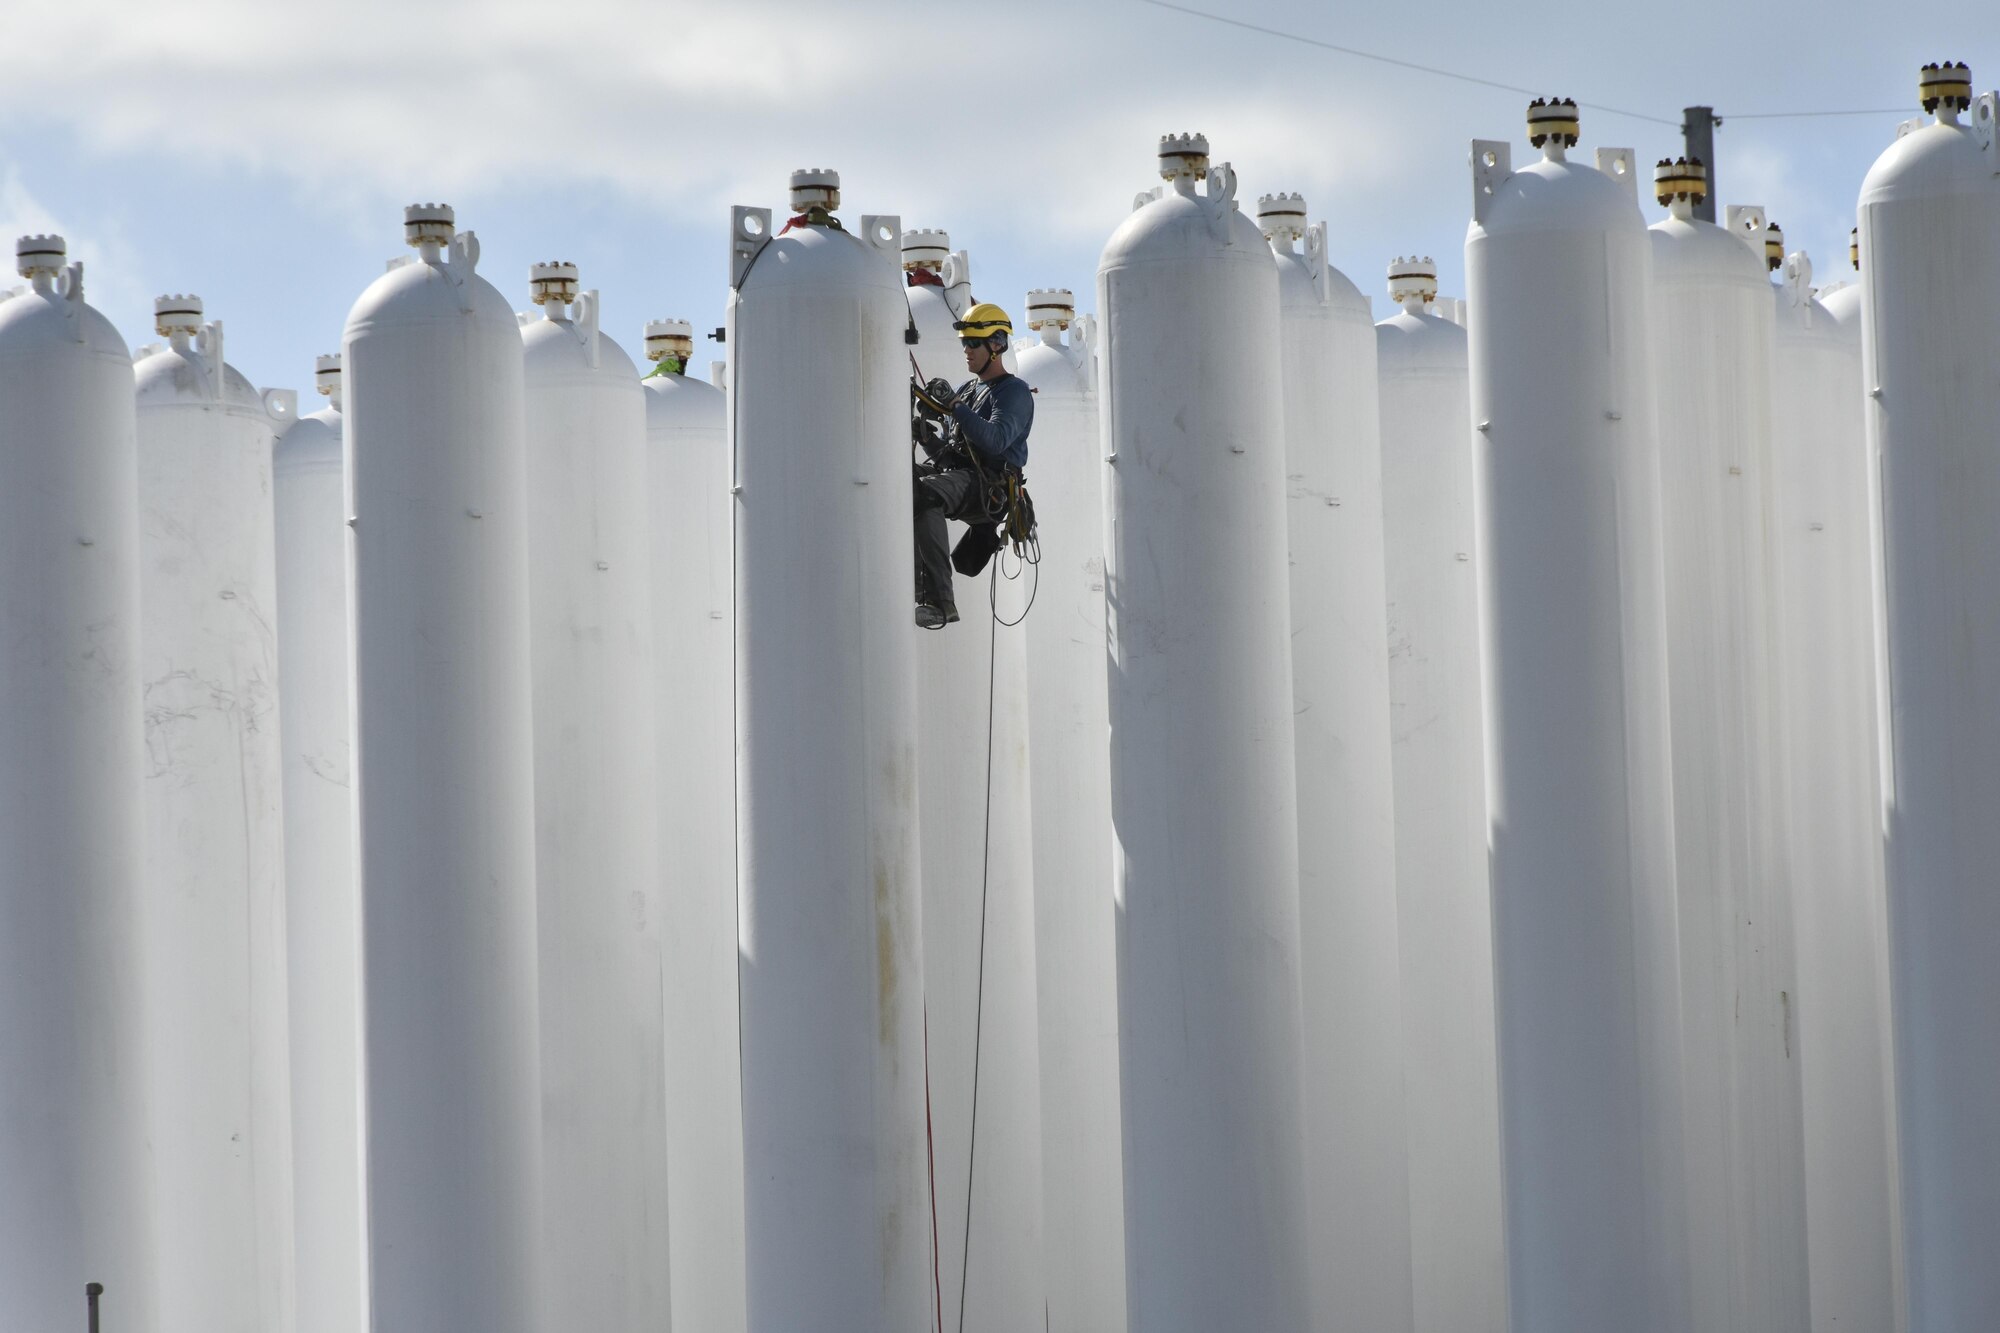 A new technique was recently used at the AEDC Aerodynamic and Propulsion Test Unit (APTU) at Arnold Air Force Base for inspecting the high pressure air storage vessels. An outside contractor was hired and members of a rope crew set sensors on the large bottles at APTU to detect flaws. Pictured is a member of the rope crew placing a sensor on one of the bottles. (U.S. Air Force photo/Rick Goodfriend)